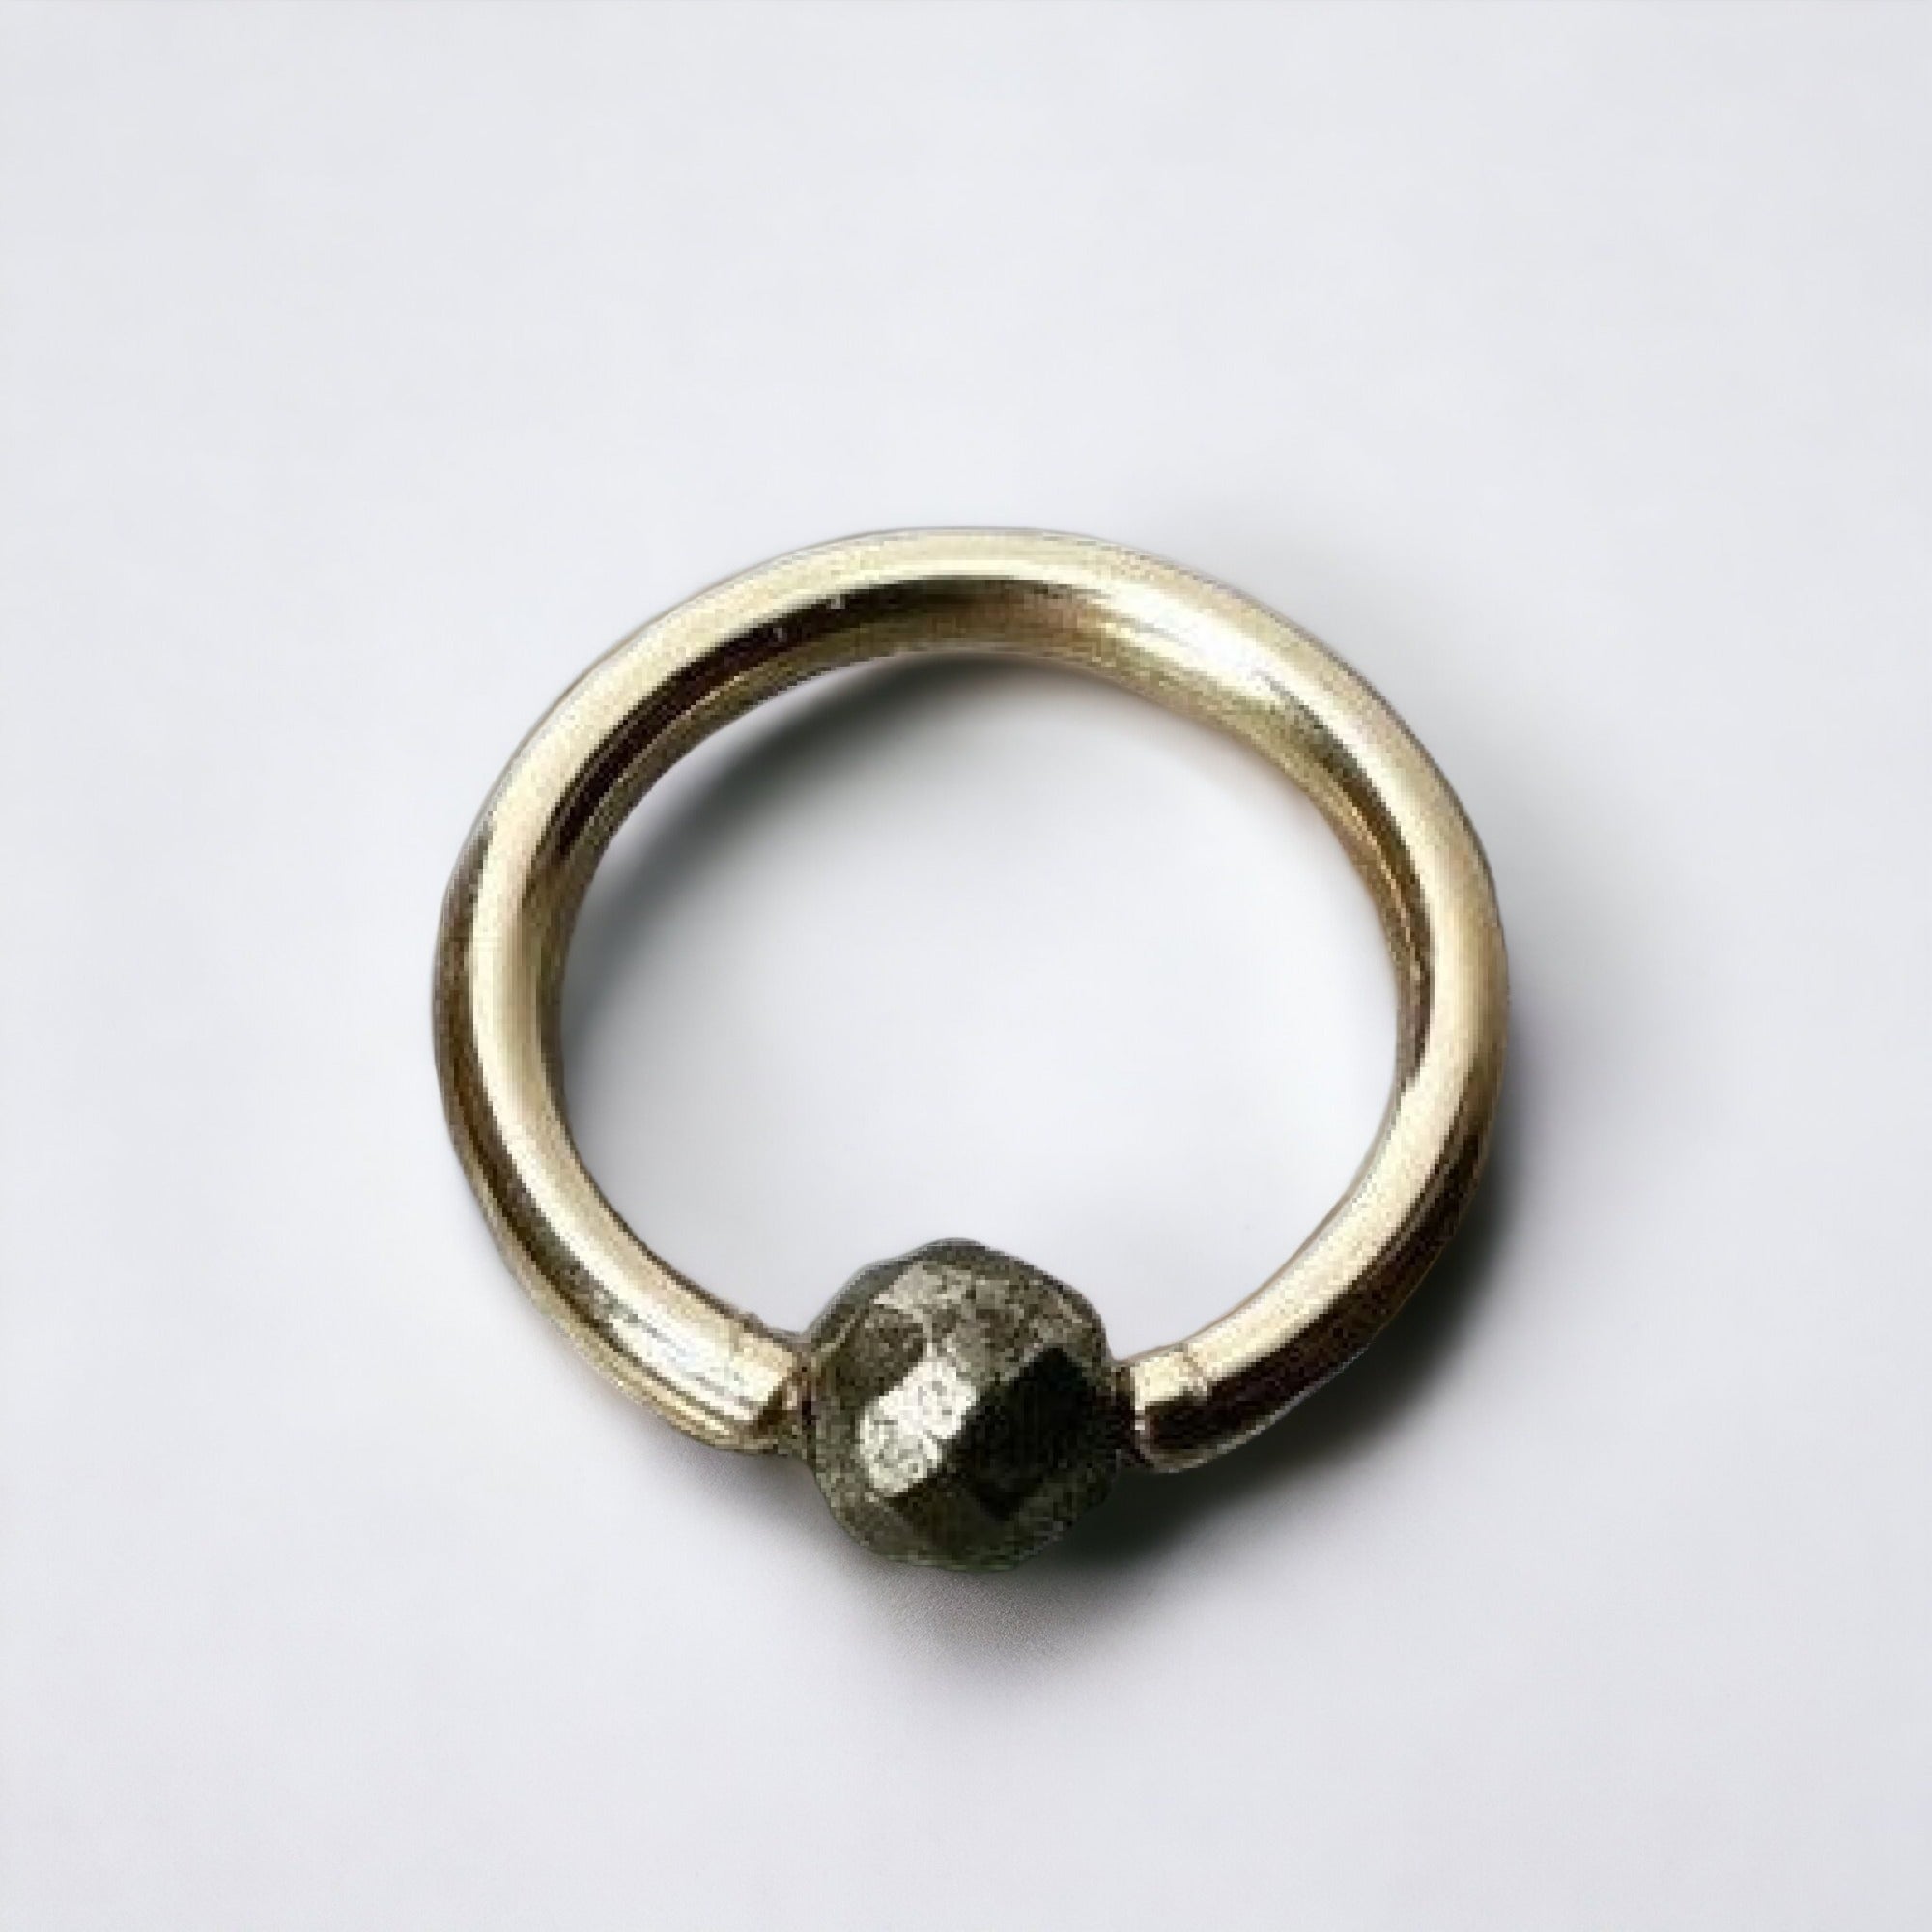 Pyrite Faceted Captive Bead Ring - 16 ga Hoop - 14k Gold (Y, W, or R), Sterling Silver, or Platinum